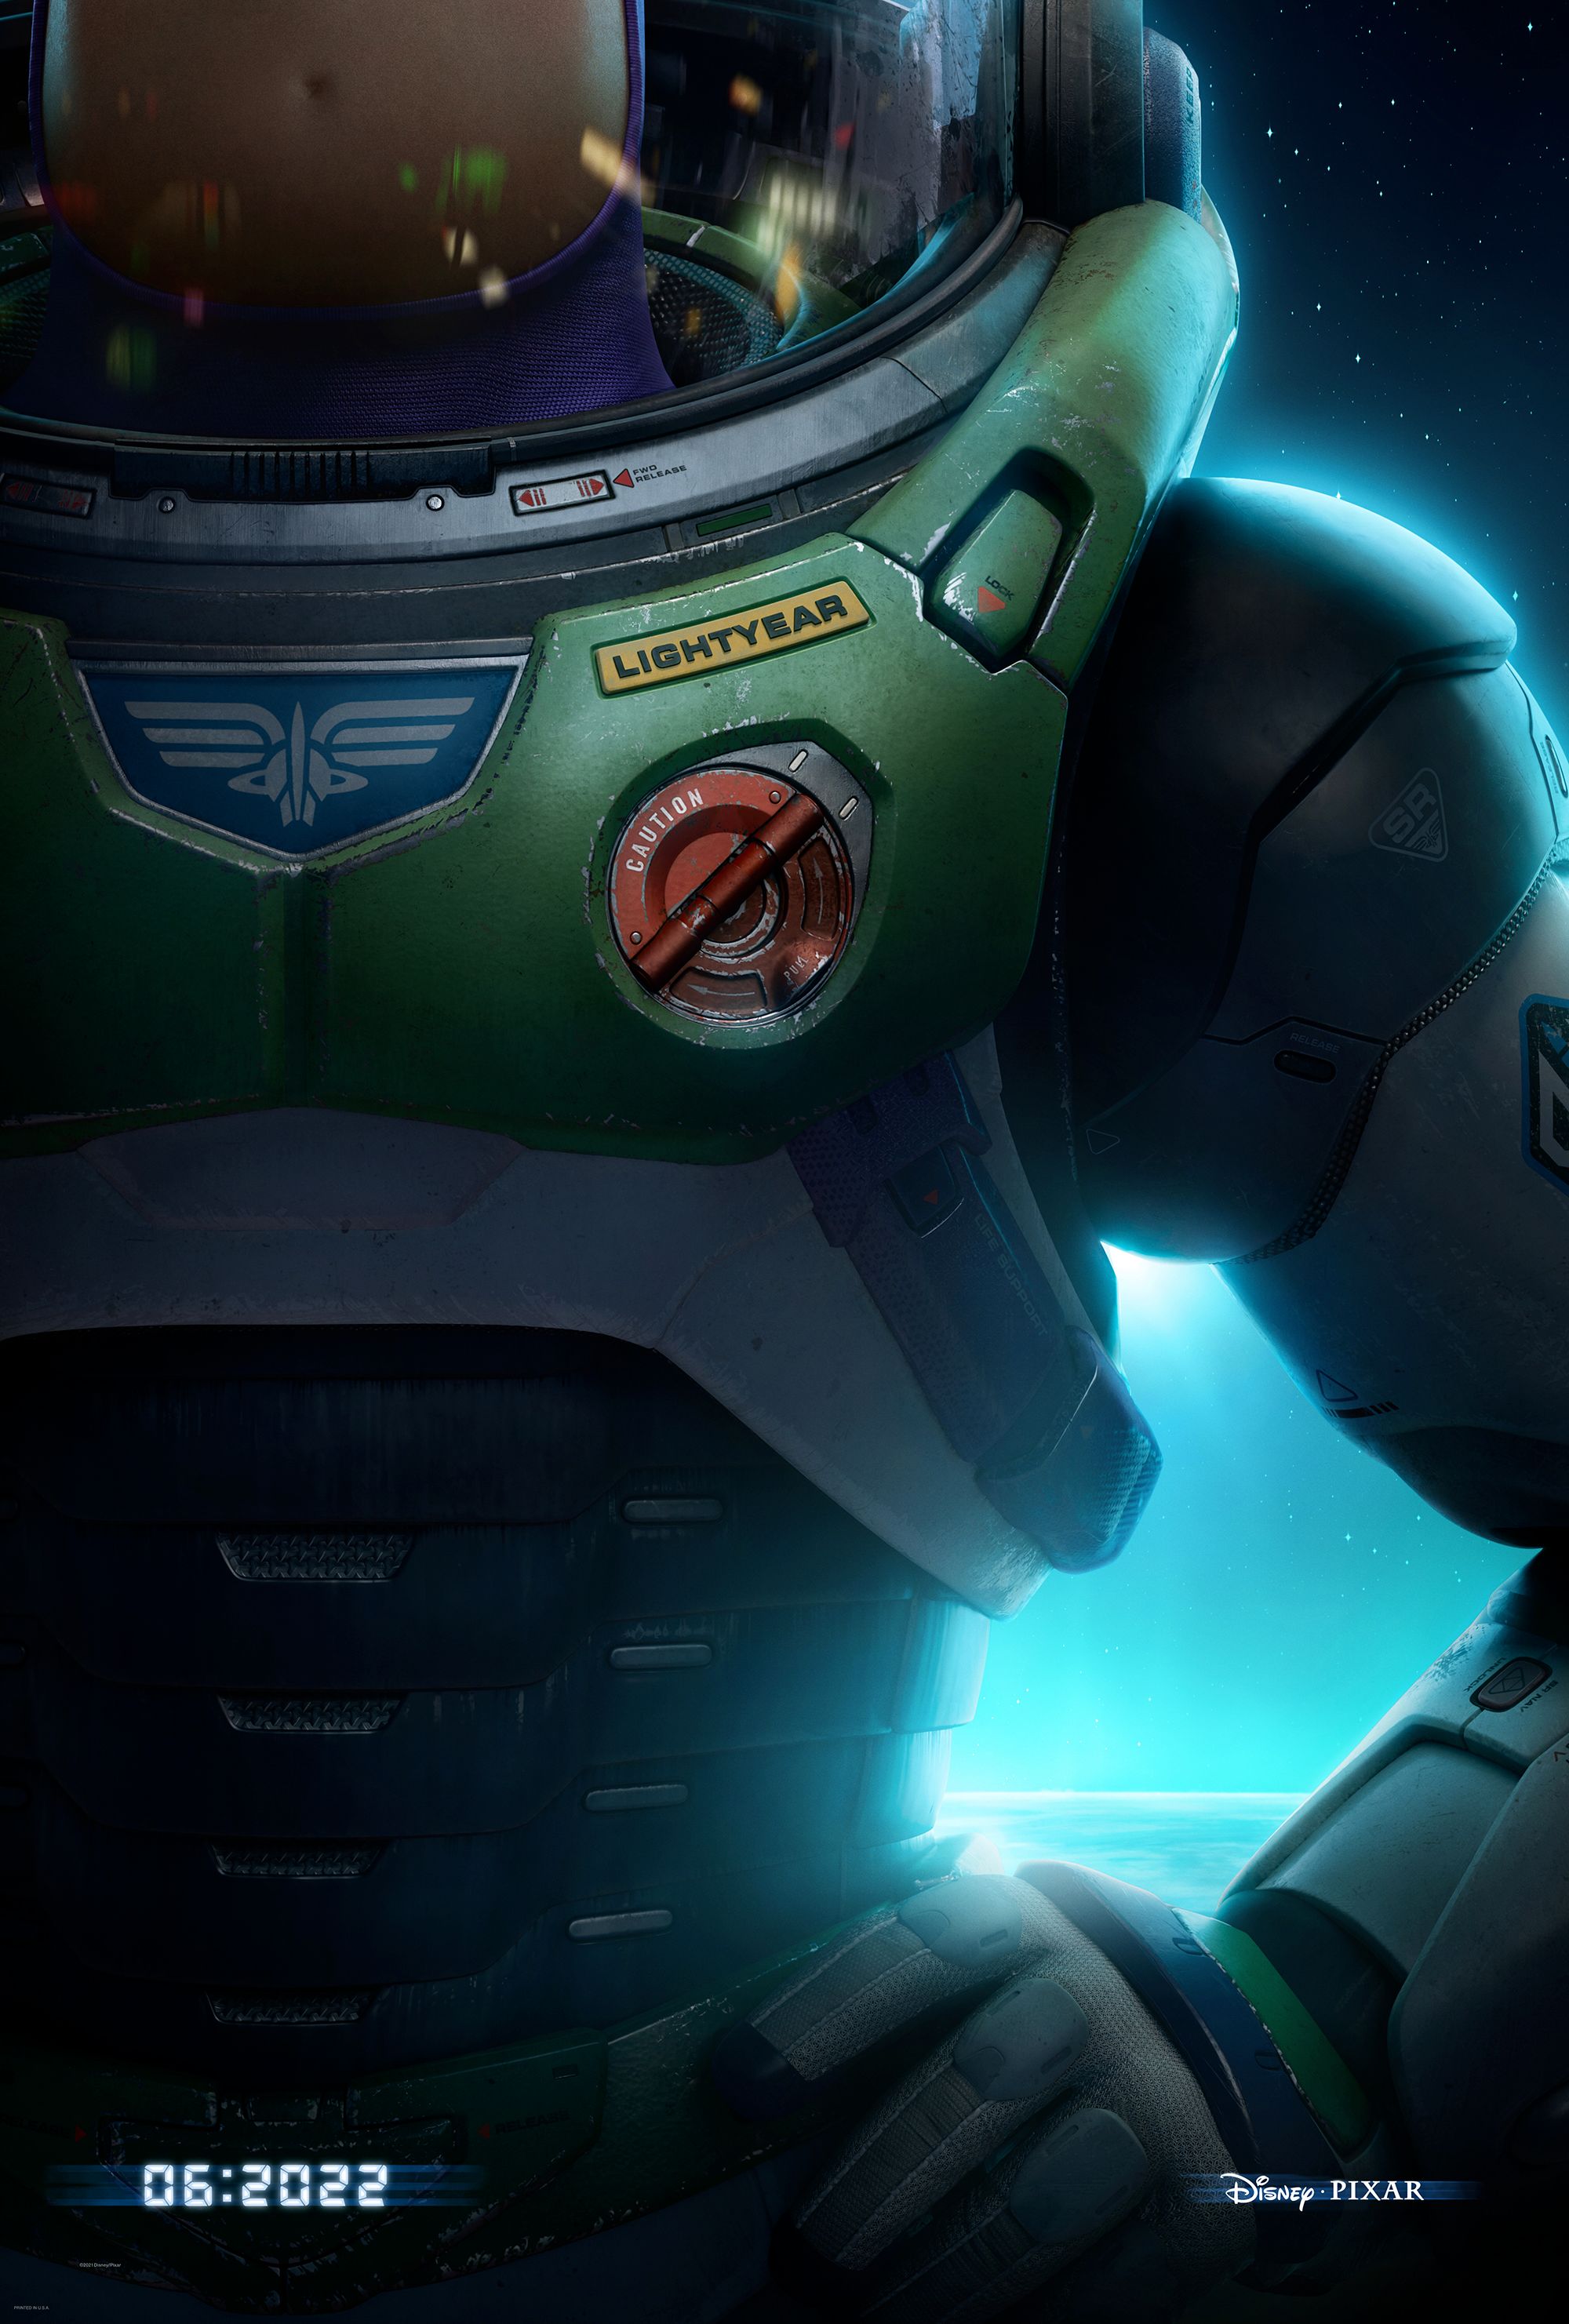 Lightyear Poster Gives CloseUp Look At Real Space Ranger Suit